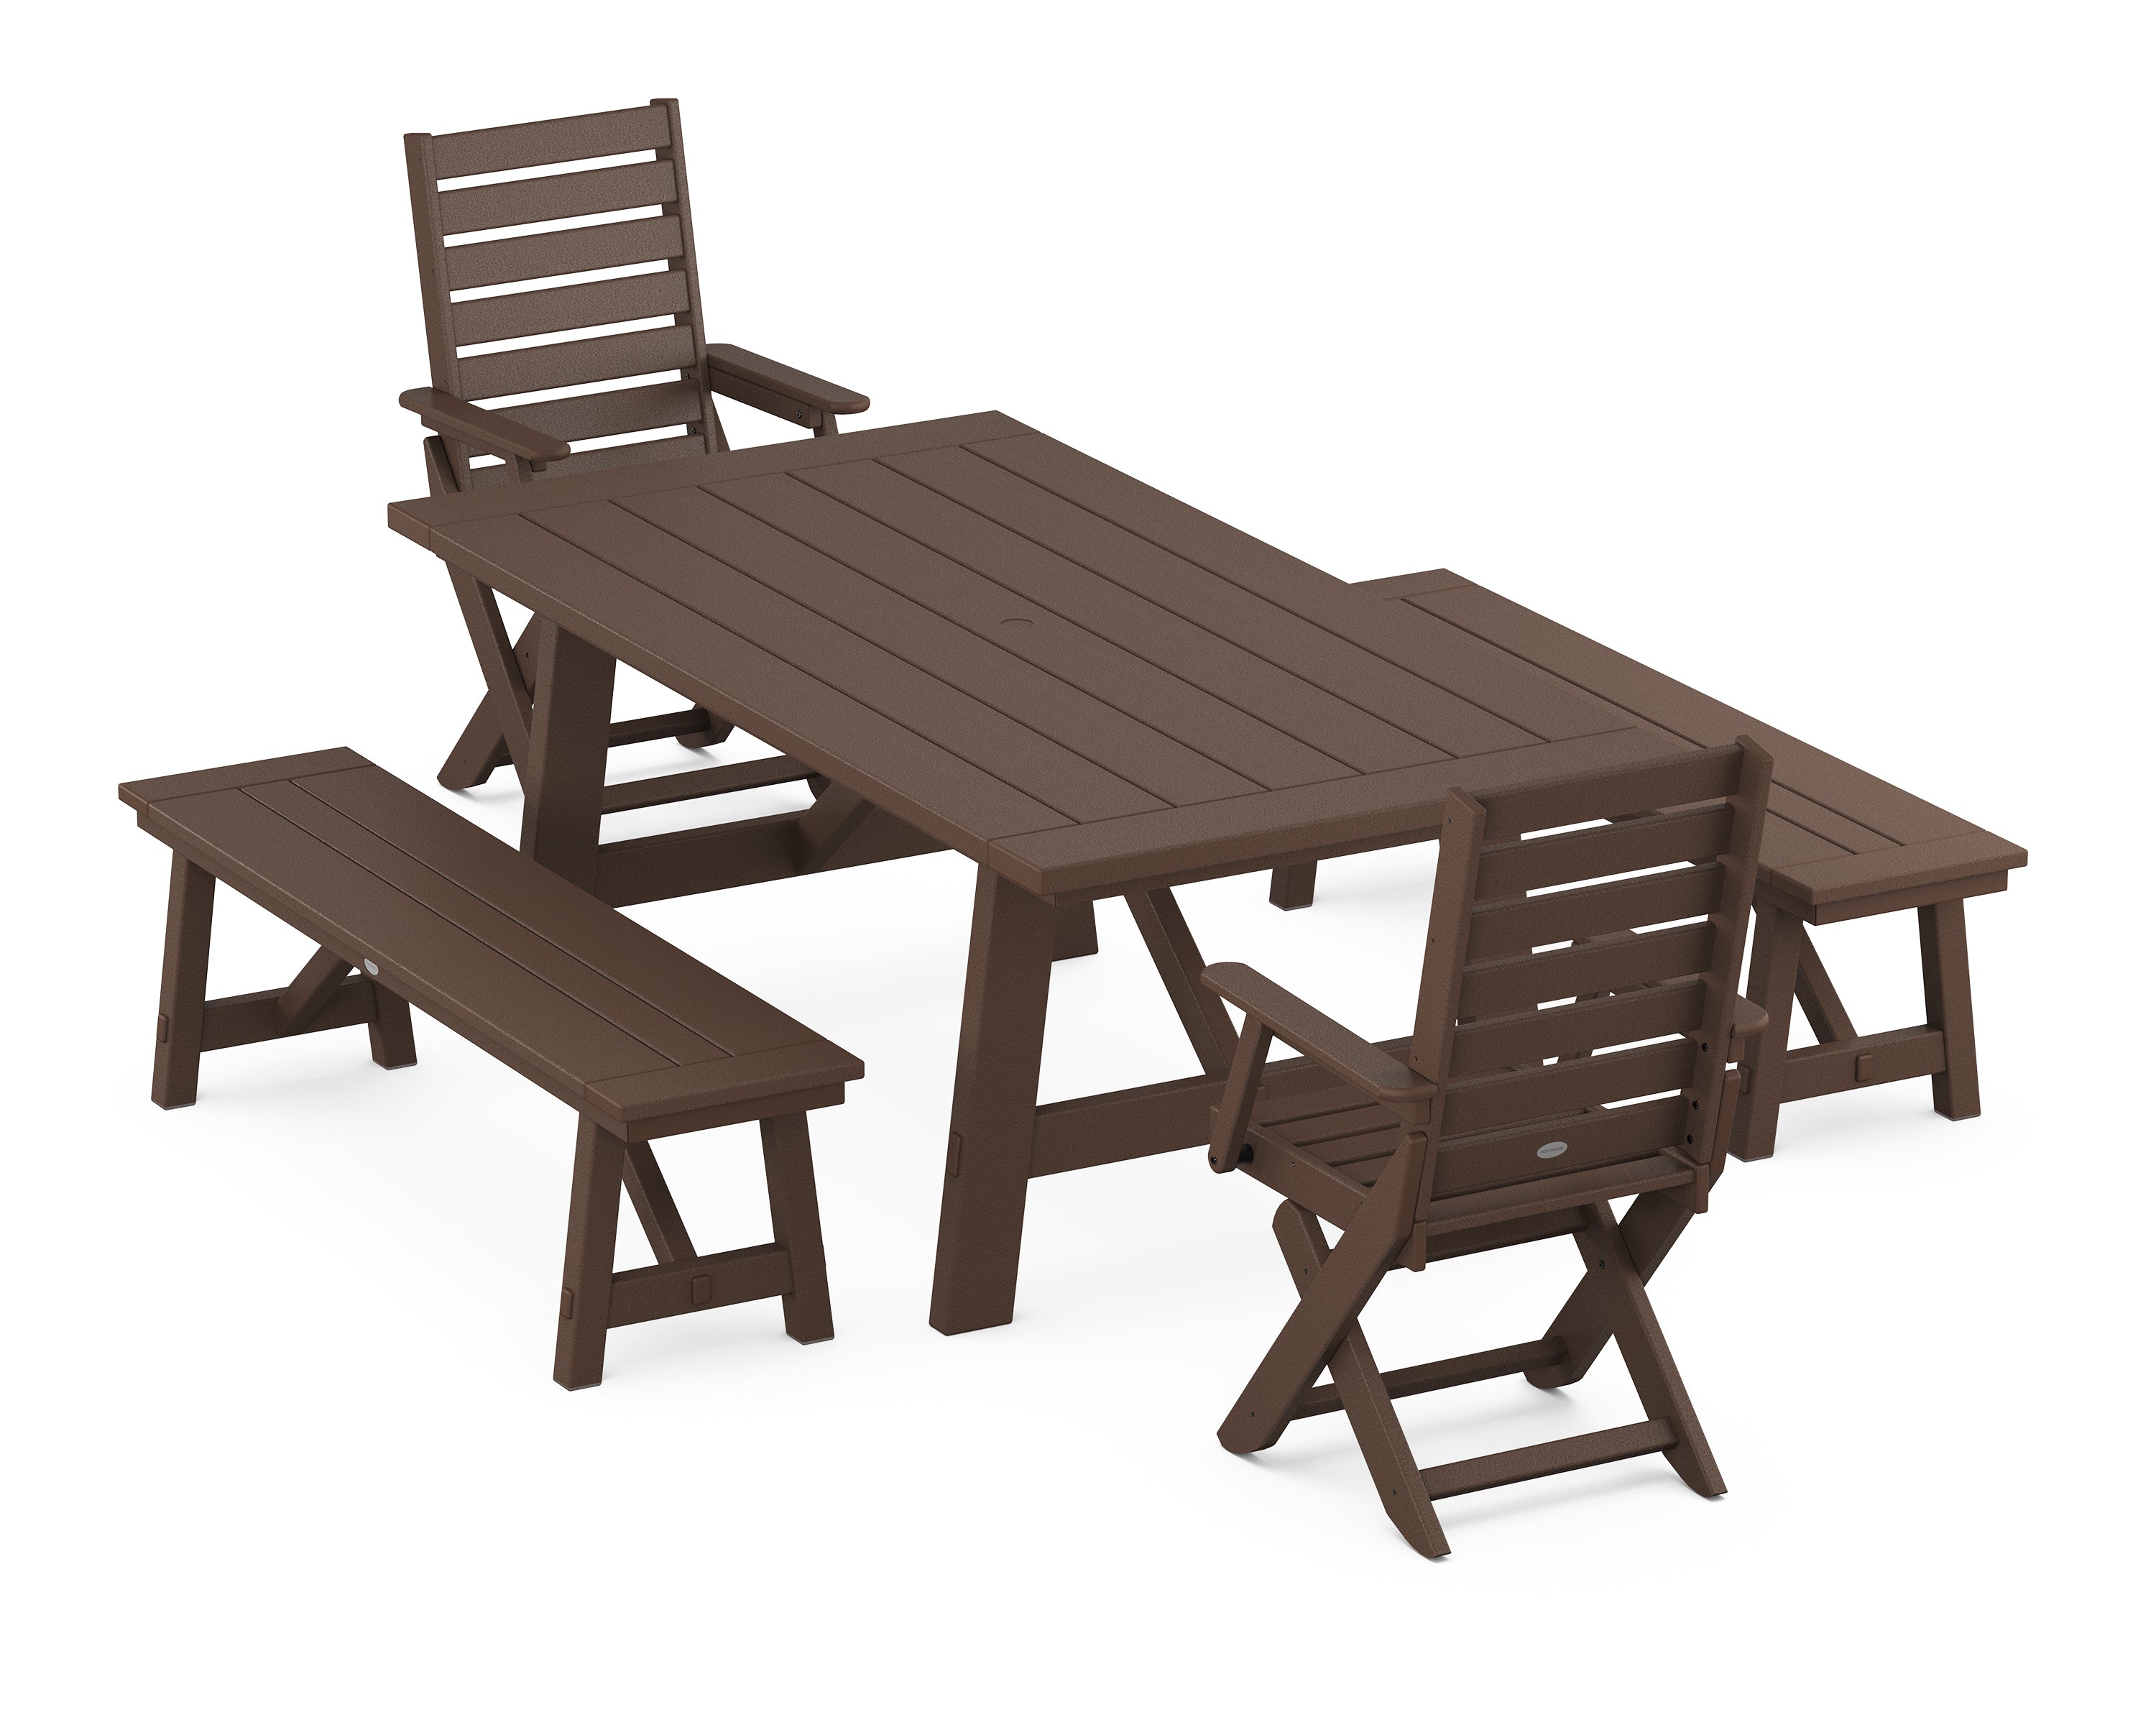 POLYWOOD® Captain Folding Chair 5-Piece Rustic Farmhouse Dining Set With Benches in Mahogany